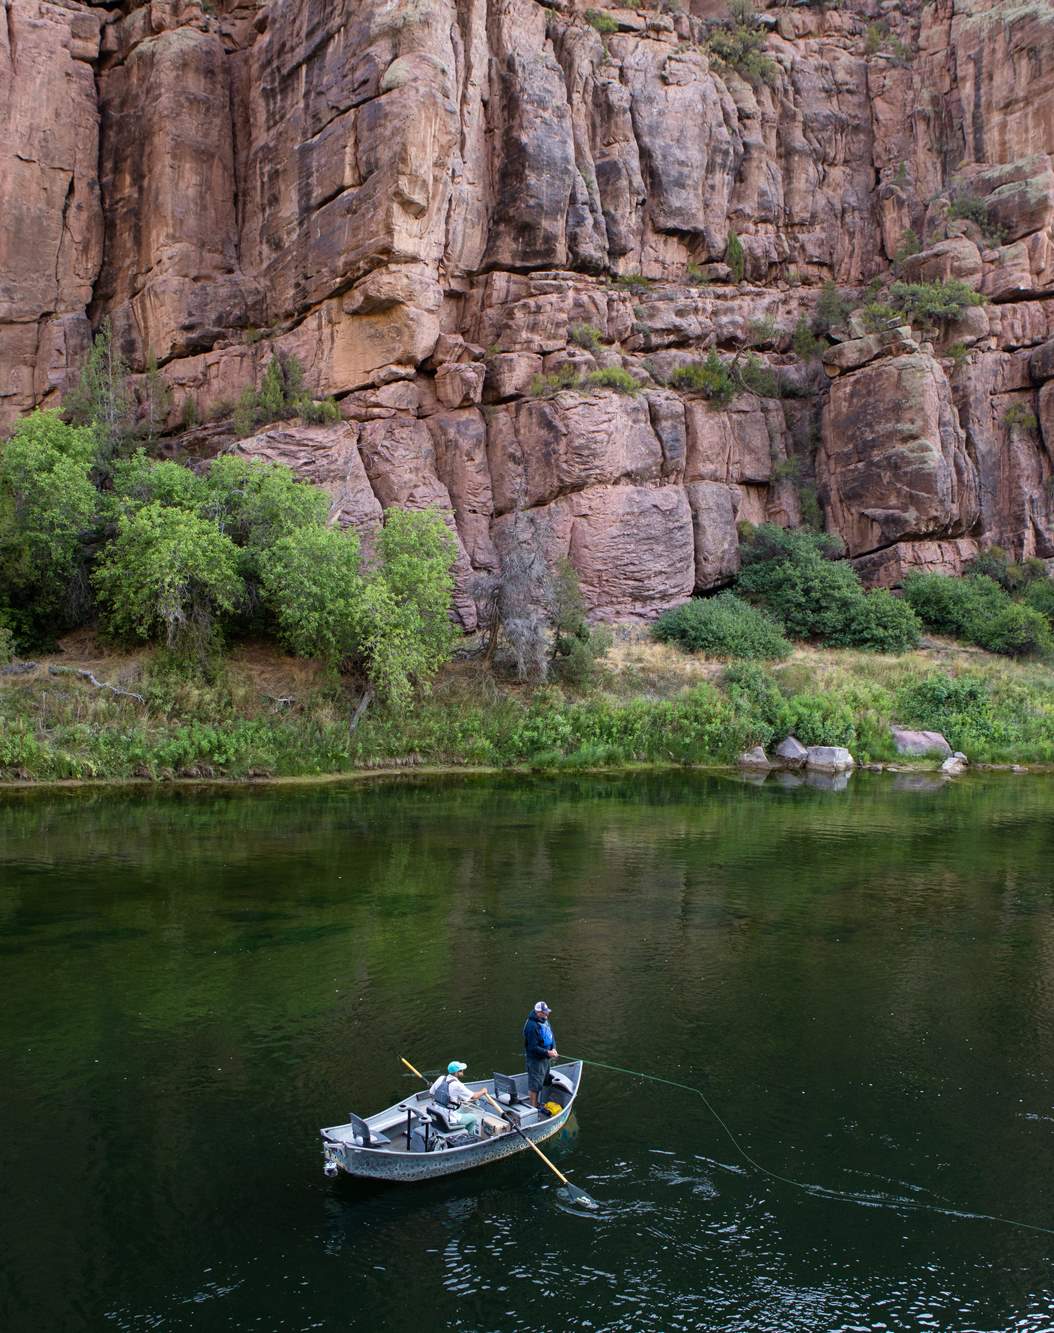 Green River Fishing Report: A Fly Fishing Guide to the Green Less Traveled  [VIDEO]